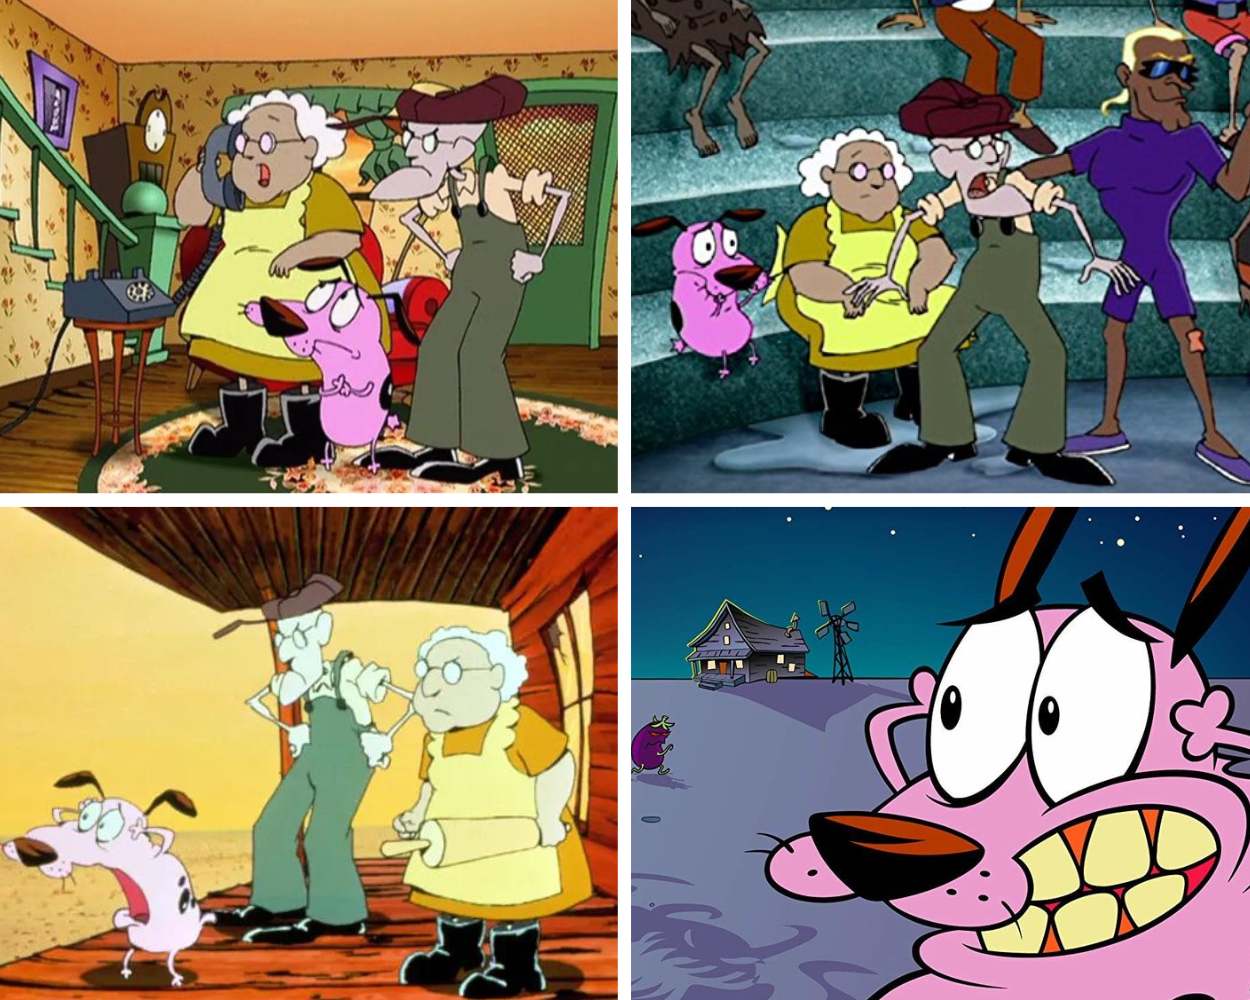 Courage the Cowardly Dog (1999 - 2002)